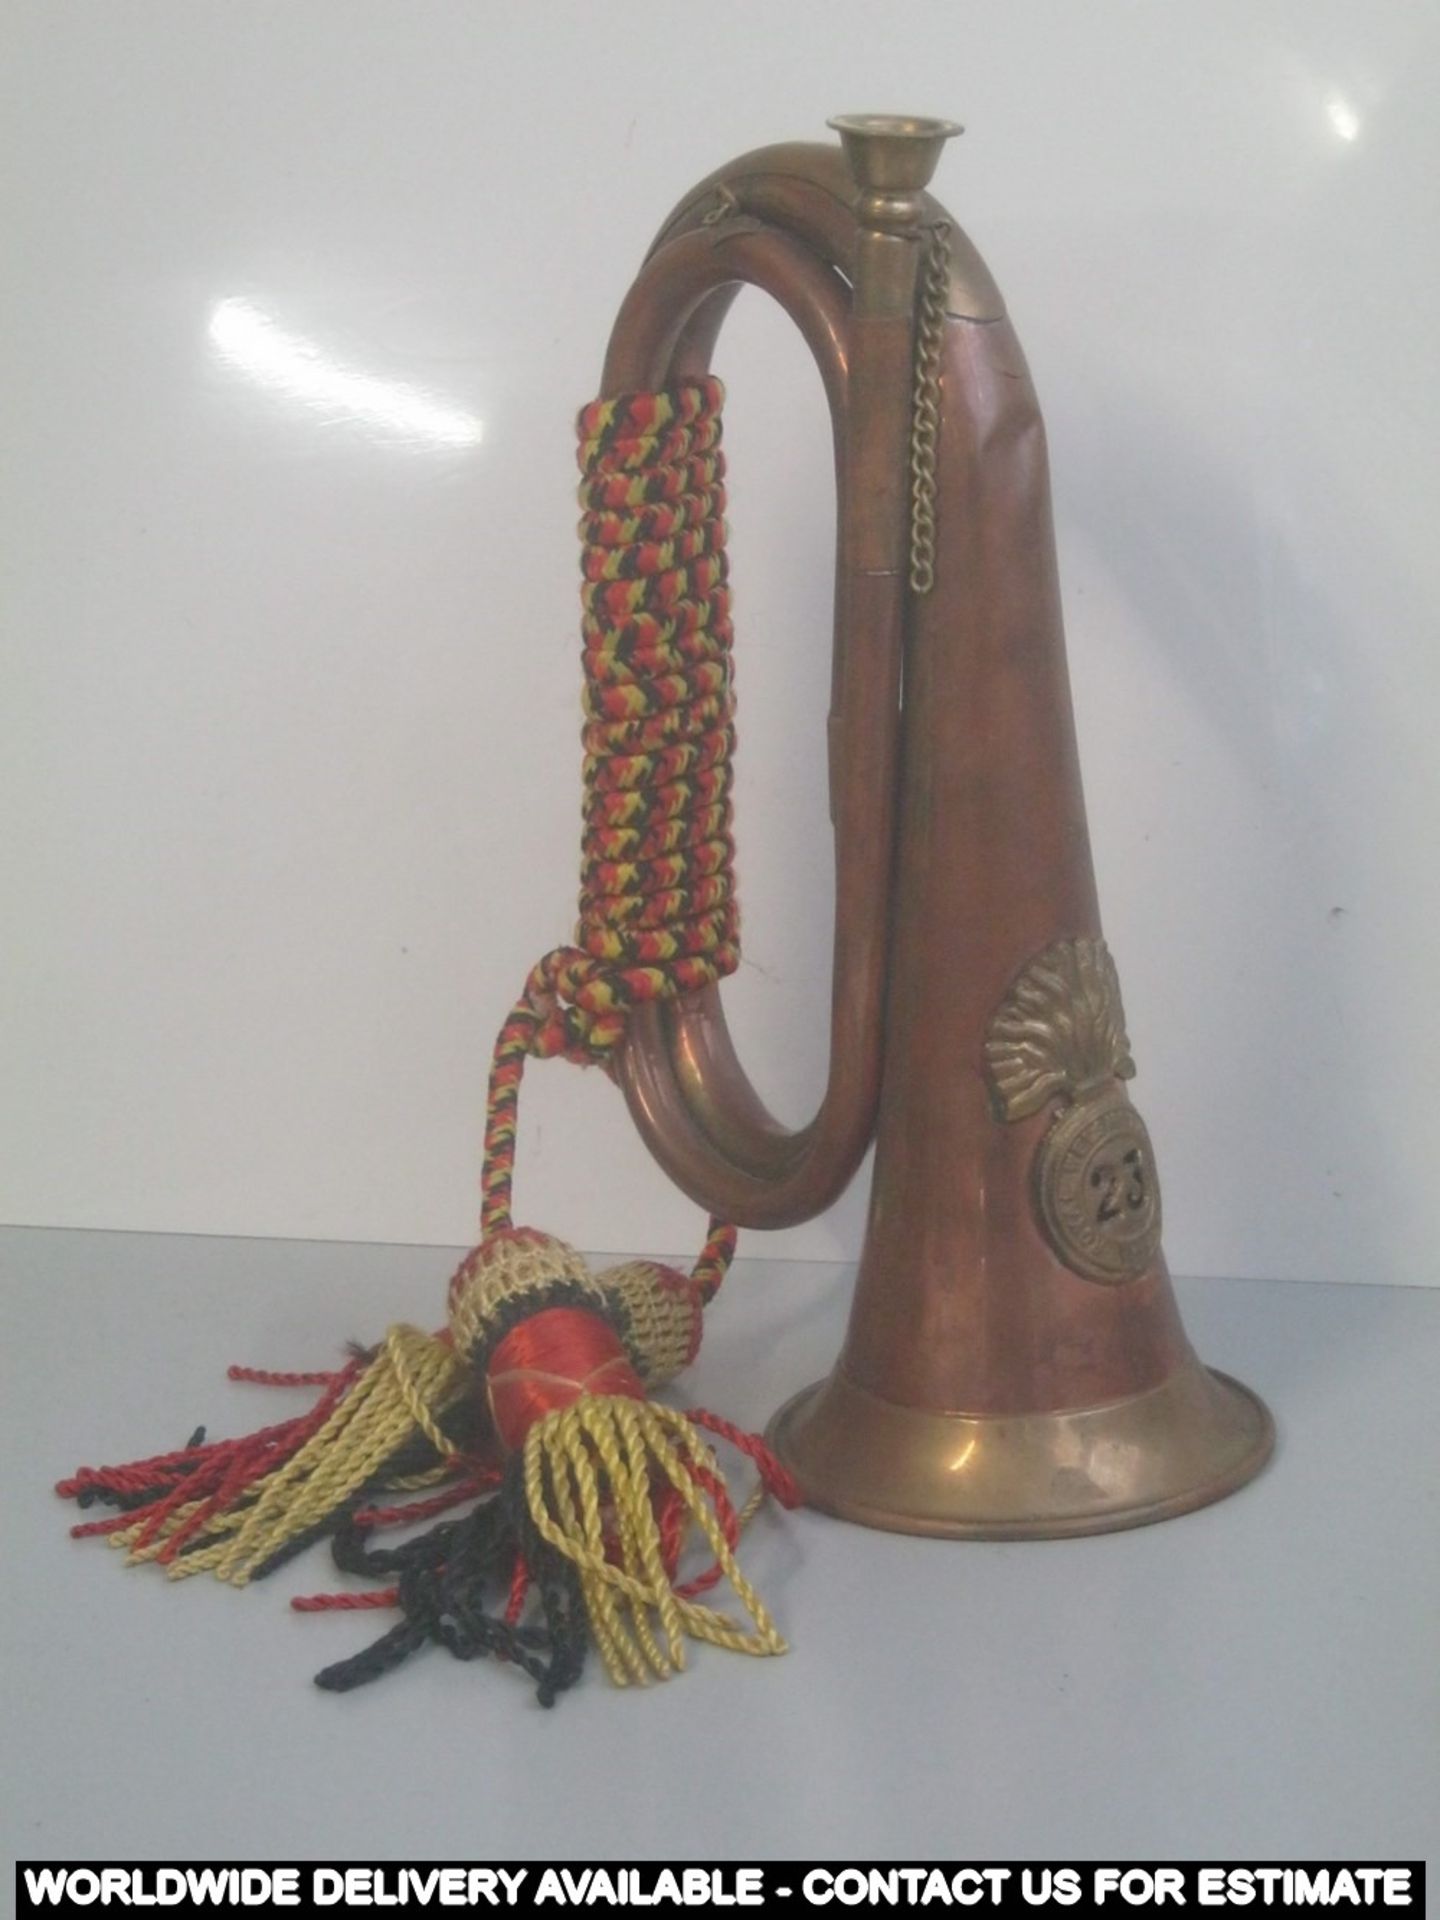 Reproduction brass and copper bugle with military crest